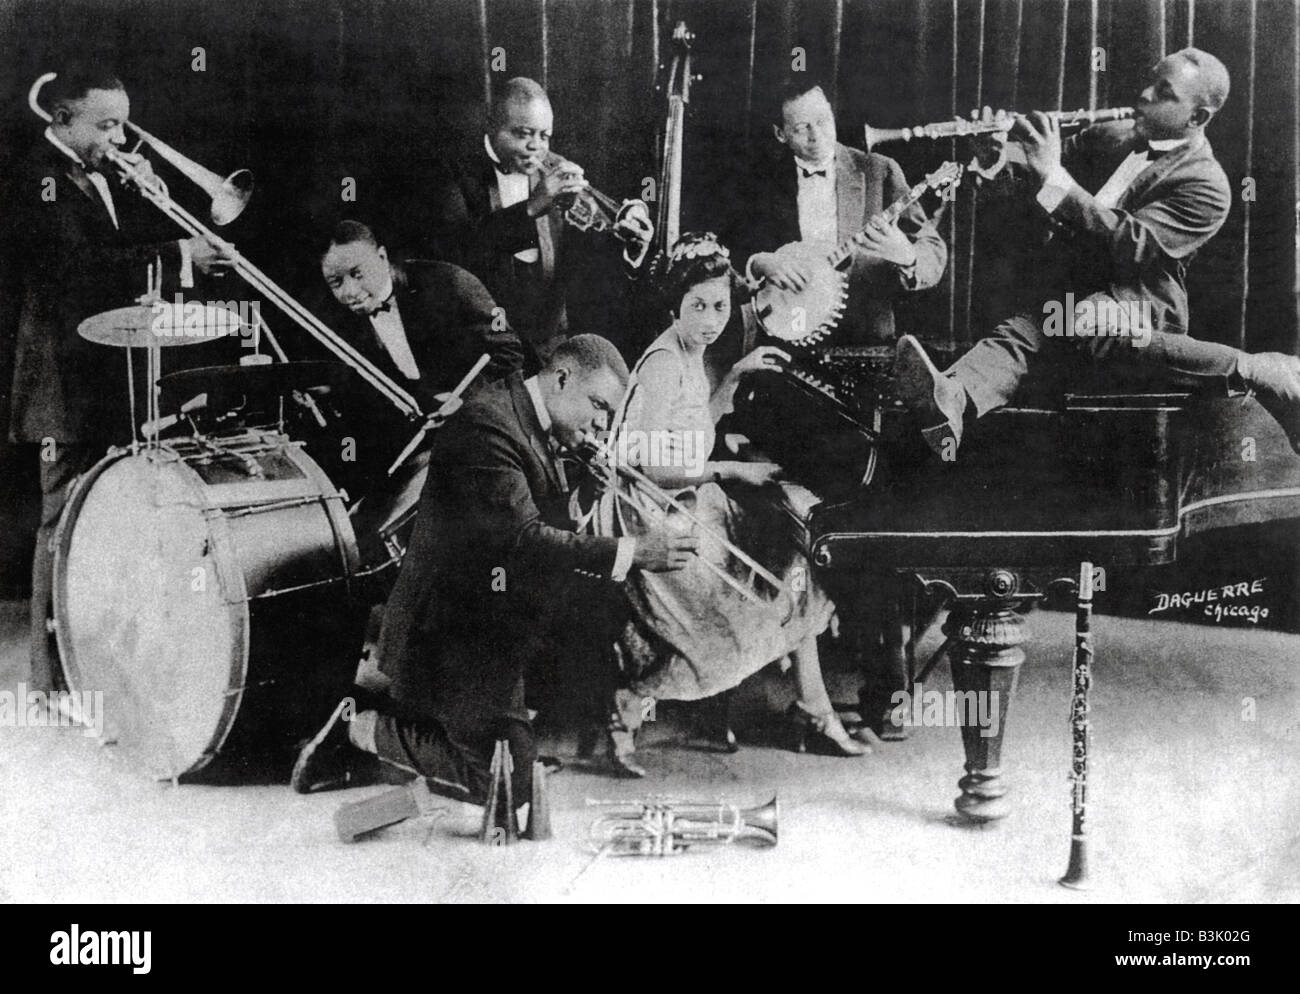 KING OLIVER'S CREOLE JAZZ BAND  with Louis Armstrong kneeling centre, King Oliver standing centre on cornet and Lil Hardin piano Stock Photo